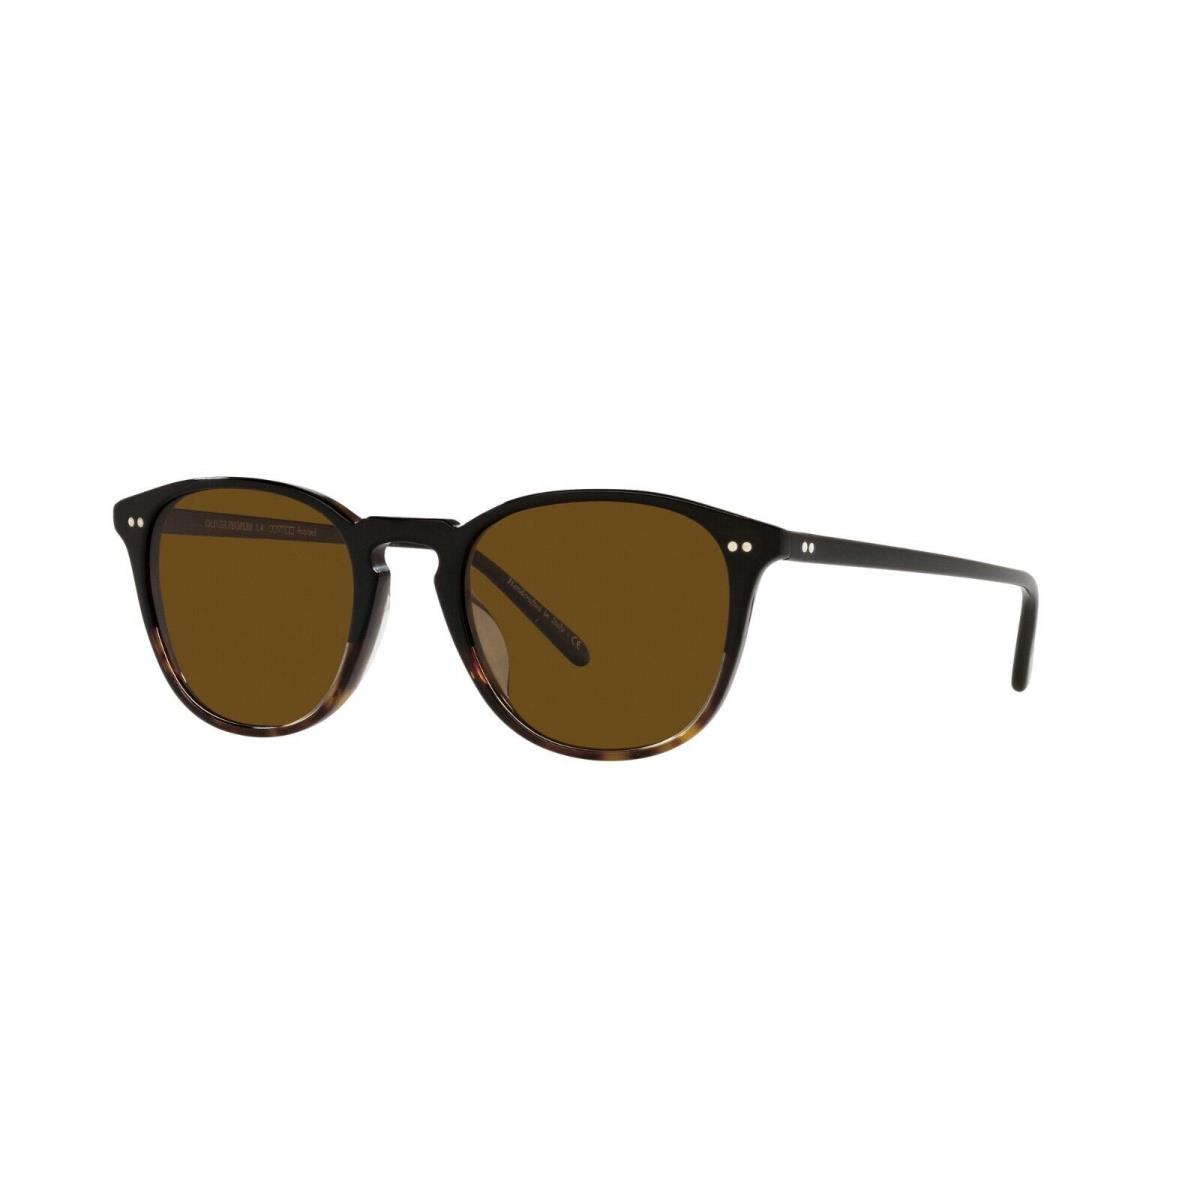 Oliver Peoples Forman L.a. OV 5414SU Black Shaded/brown Polarized Sunglasses - Black With 362 Shaded Frame, Brown Polarized Lens